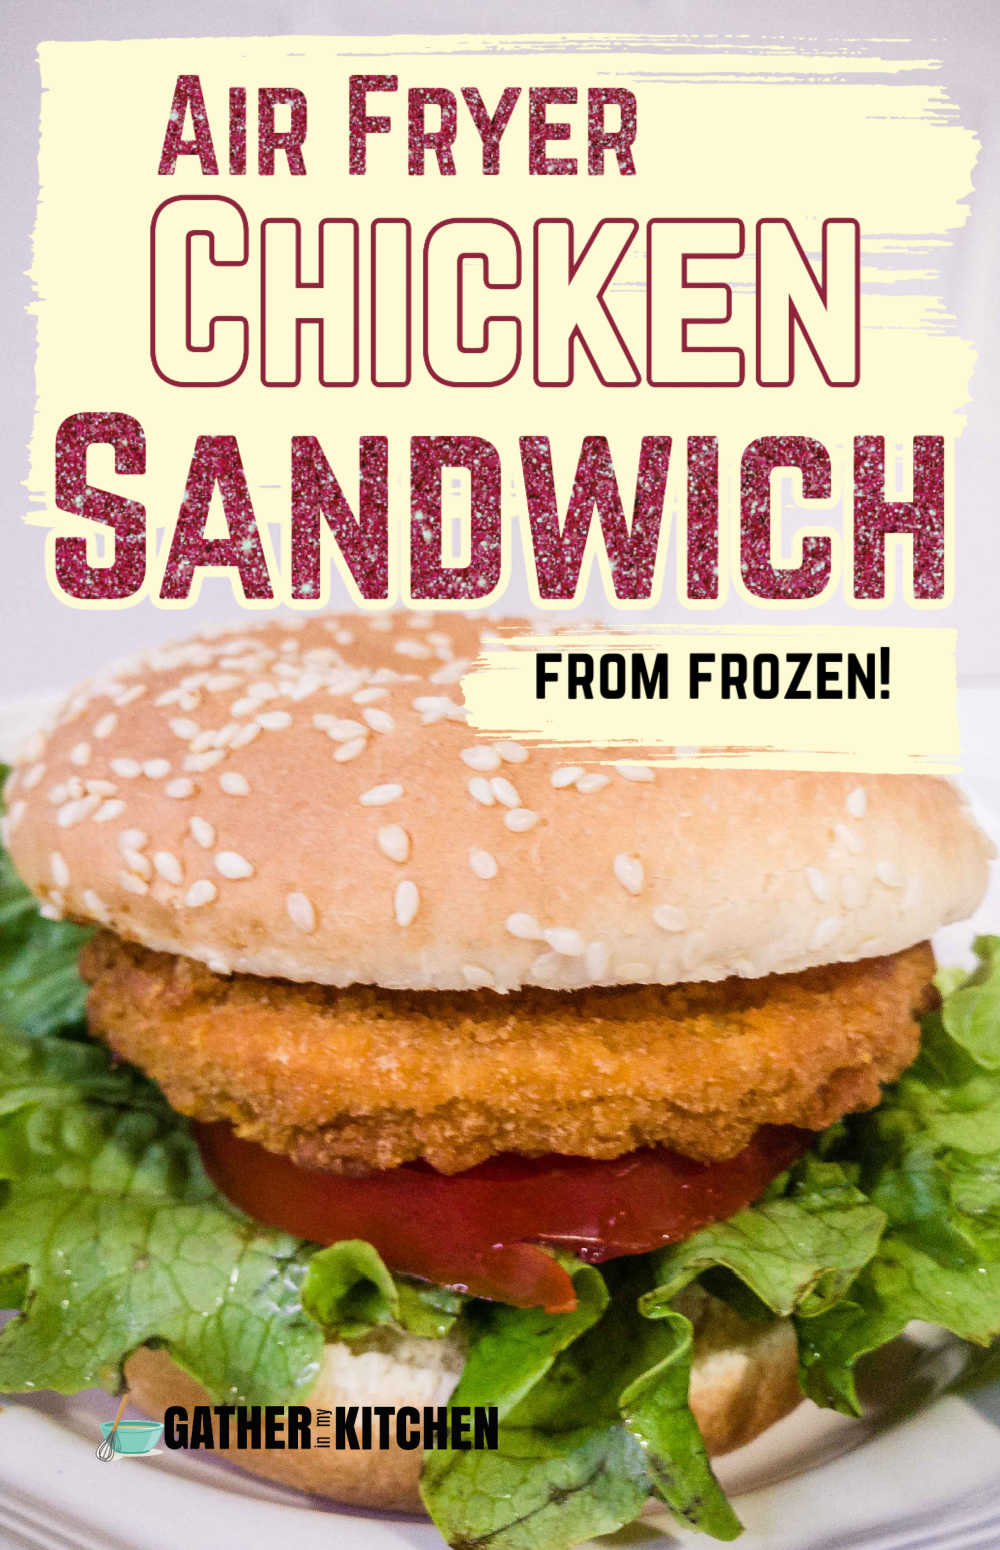 Pin Image: Top says "Air Fryer Chicken Sandwich from Frozen" and bottom has a chicken sandwich.